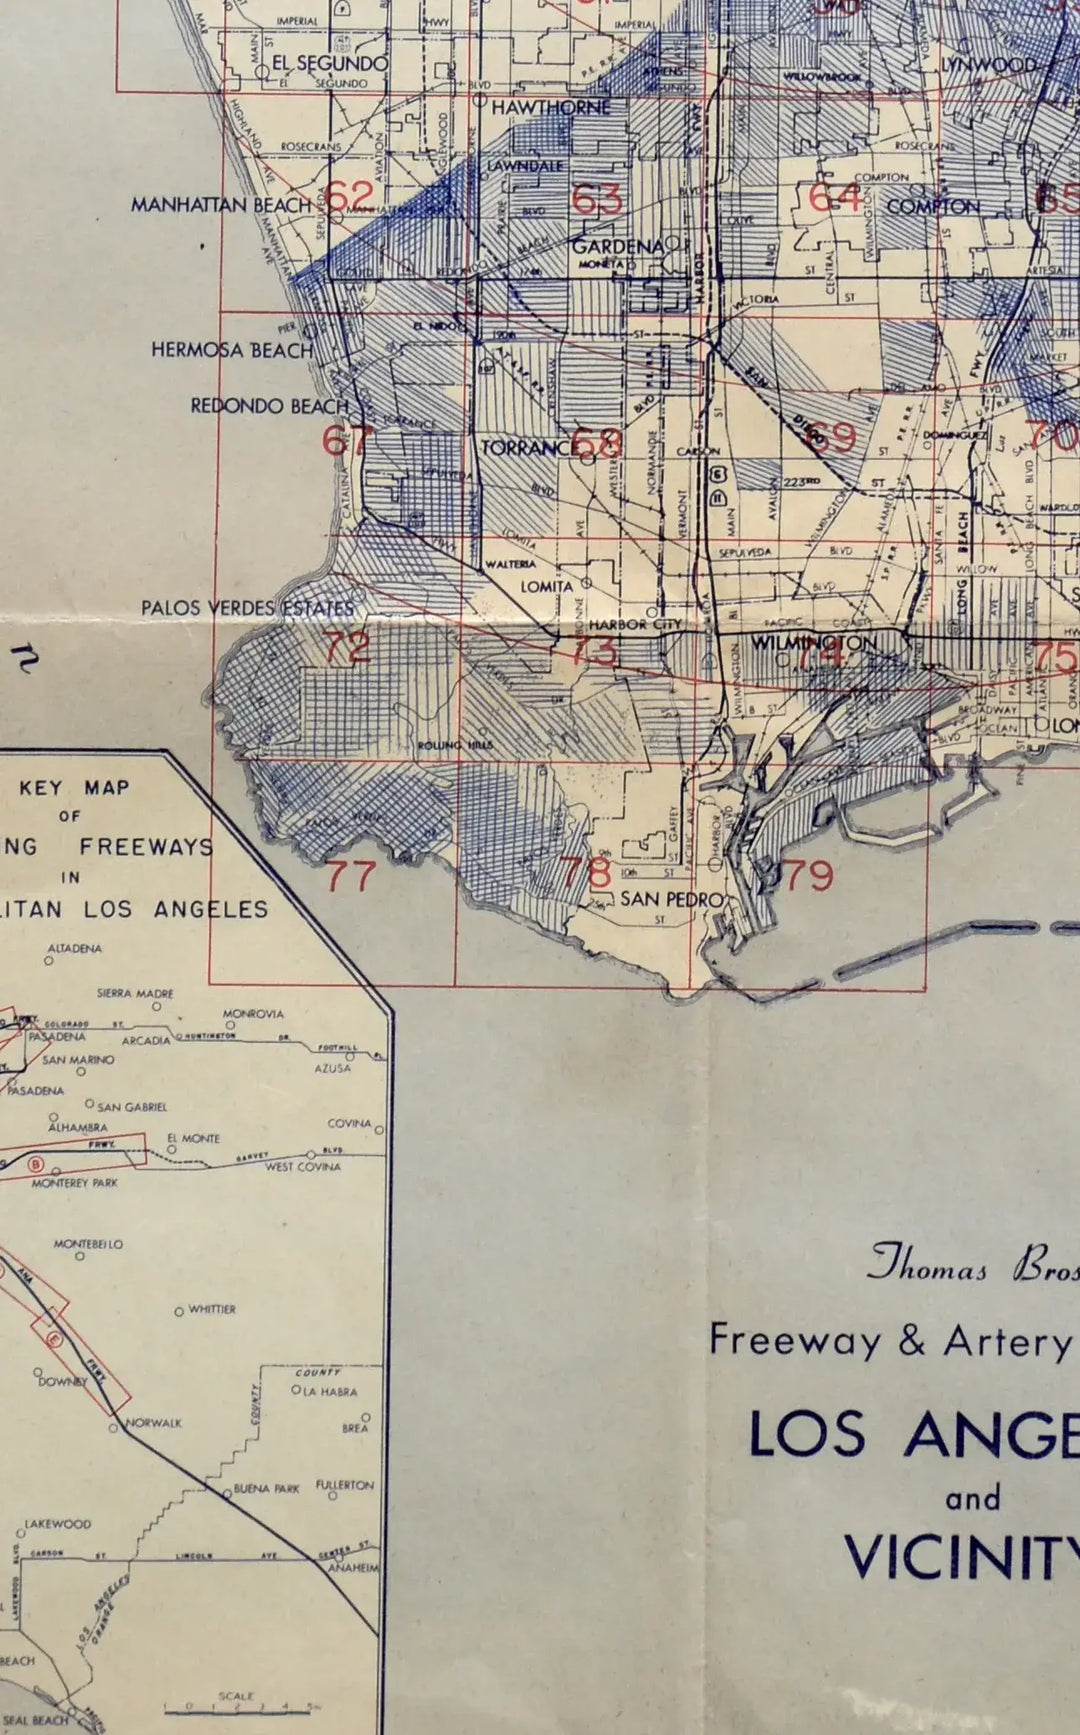 An old map of Los Angeles by Ed Fairburn | "Los Angeles I".